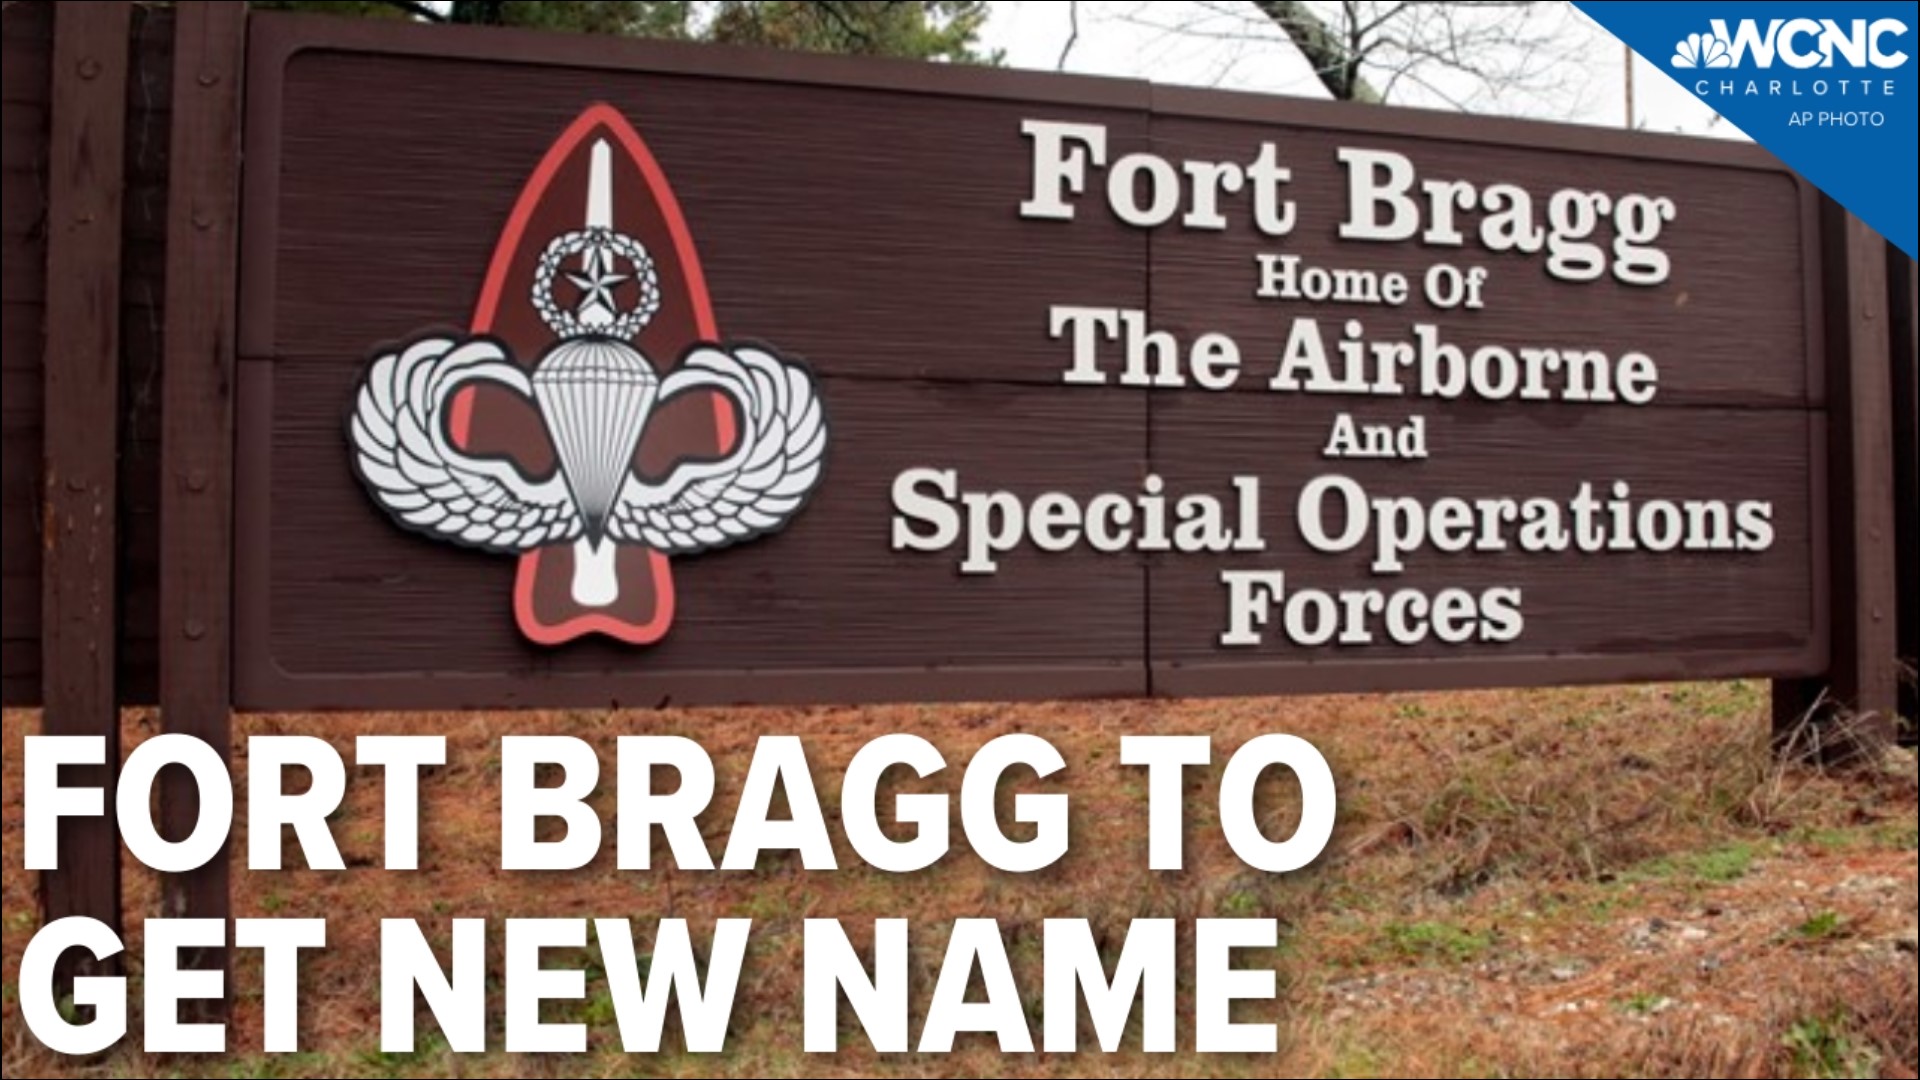 Fort Bragg, currently named after Confederate General Braxton Bragg, will be renamed to commemorate the American value of liberty.